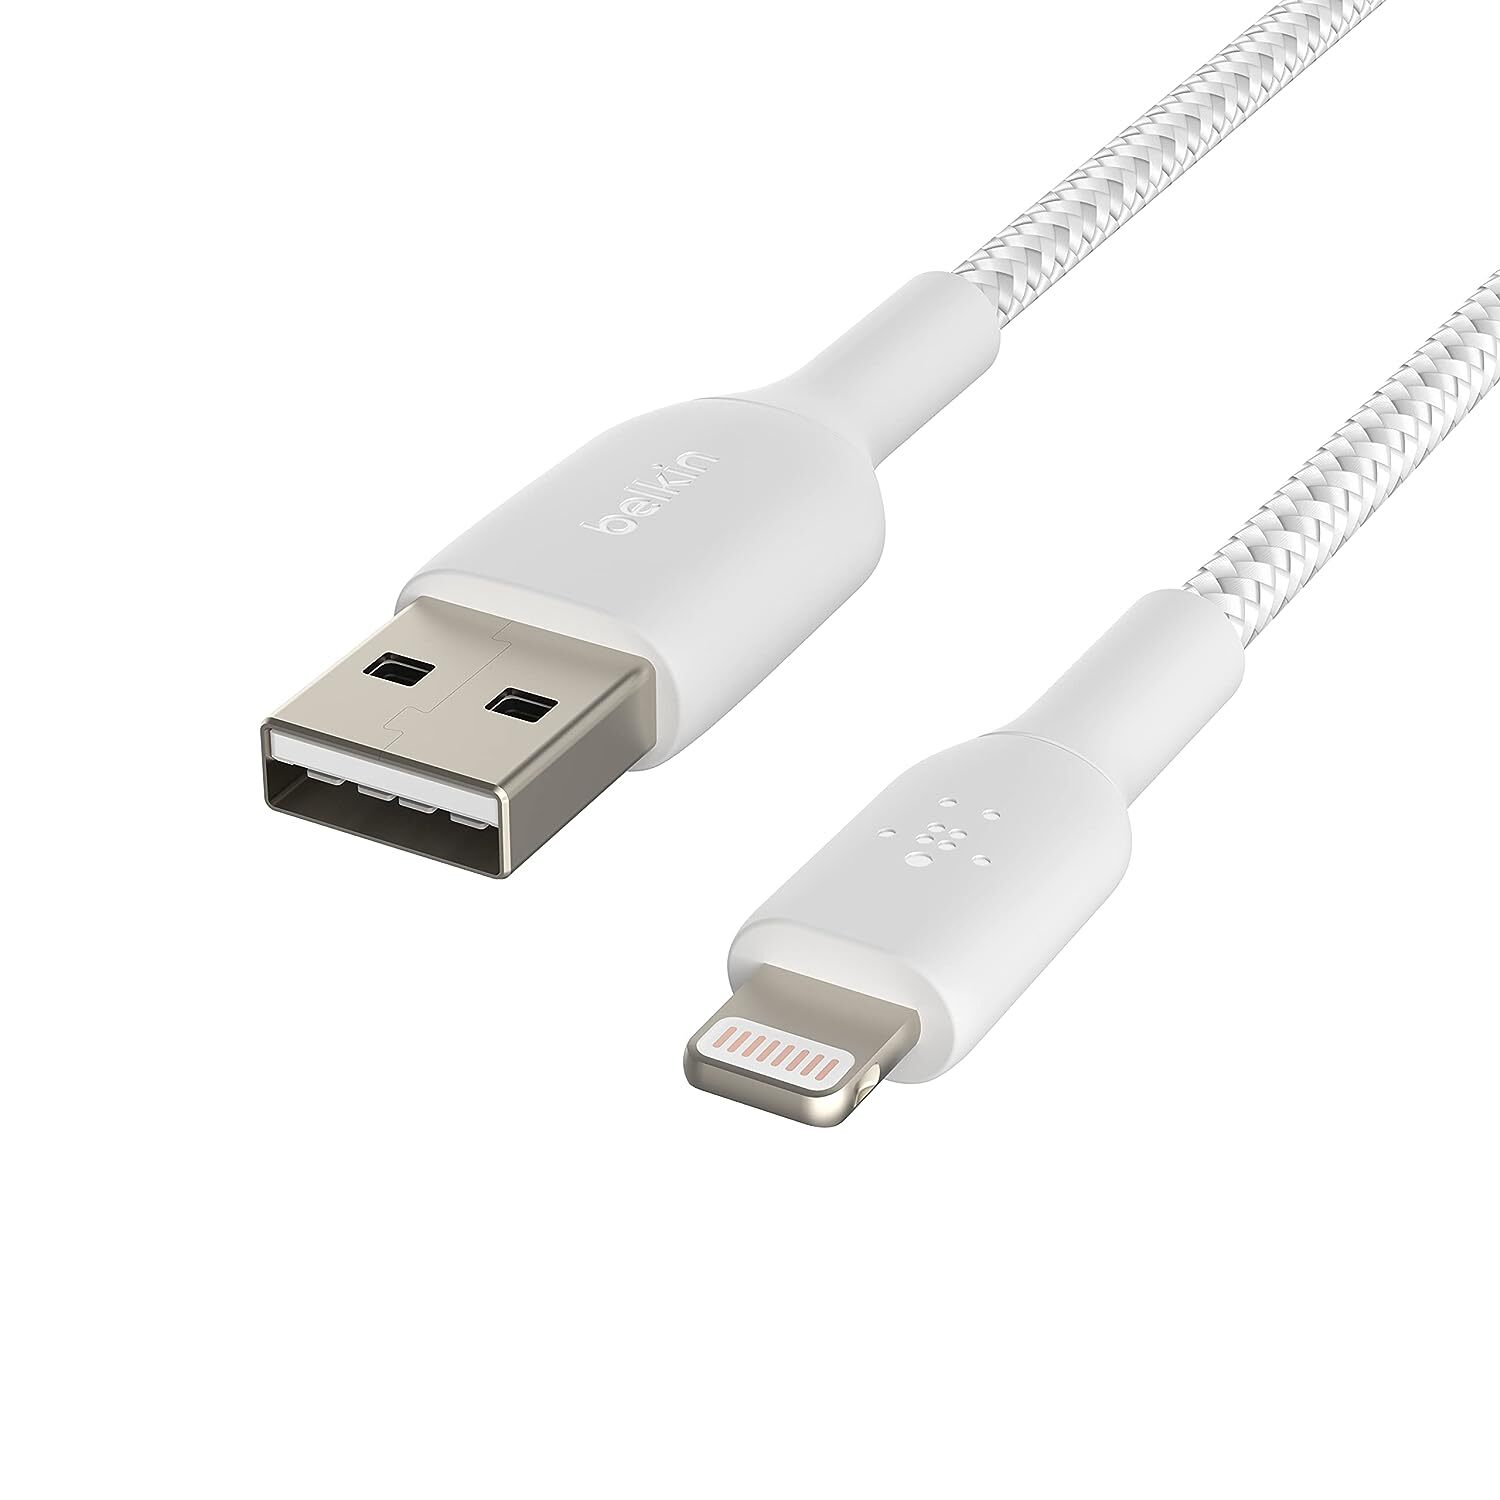 Belkin Apple Certified Lightning to USB A and Sync Tough Braided Cable for iPhone, iPad, Air Pods, 6.6 feet (2 meters) – White